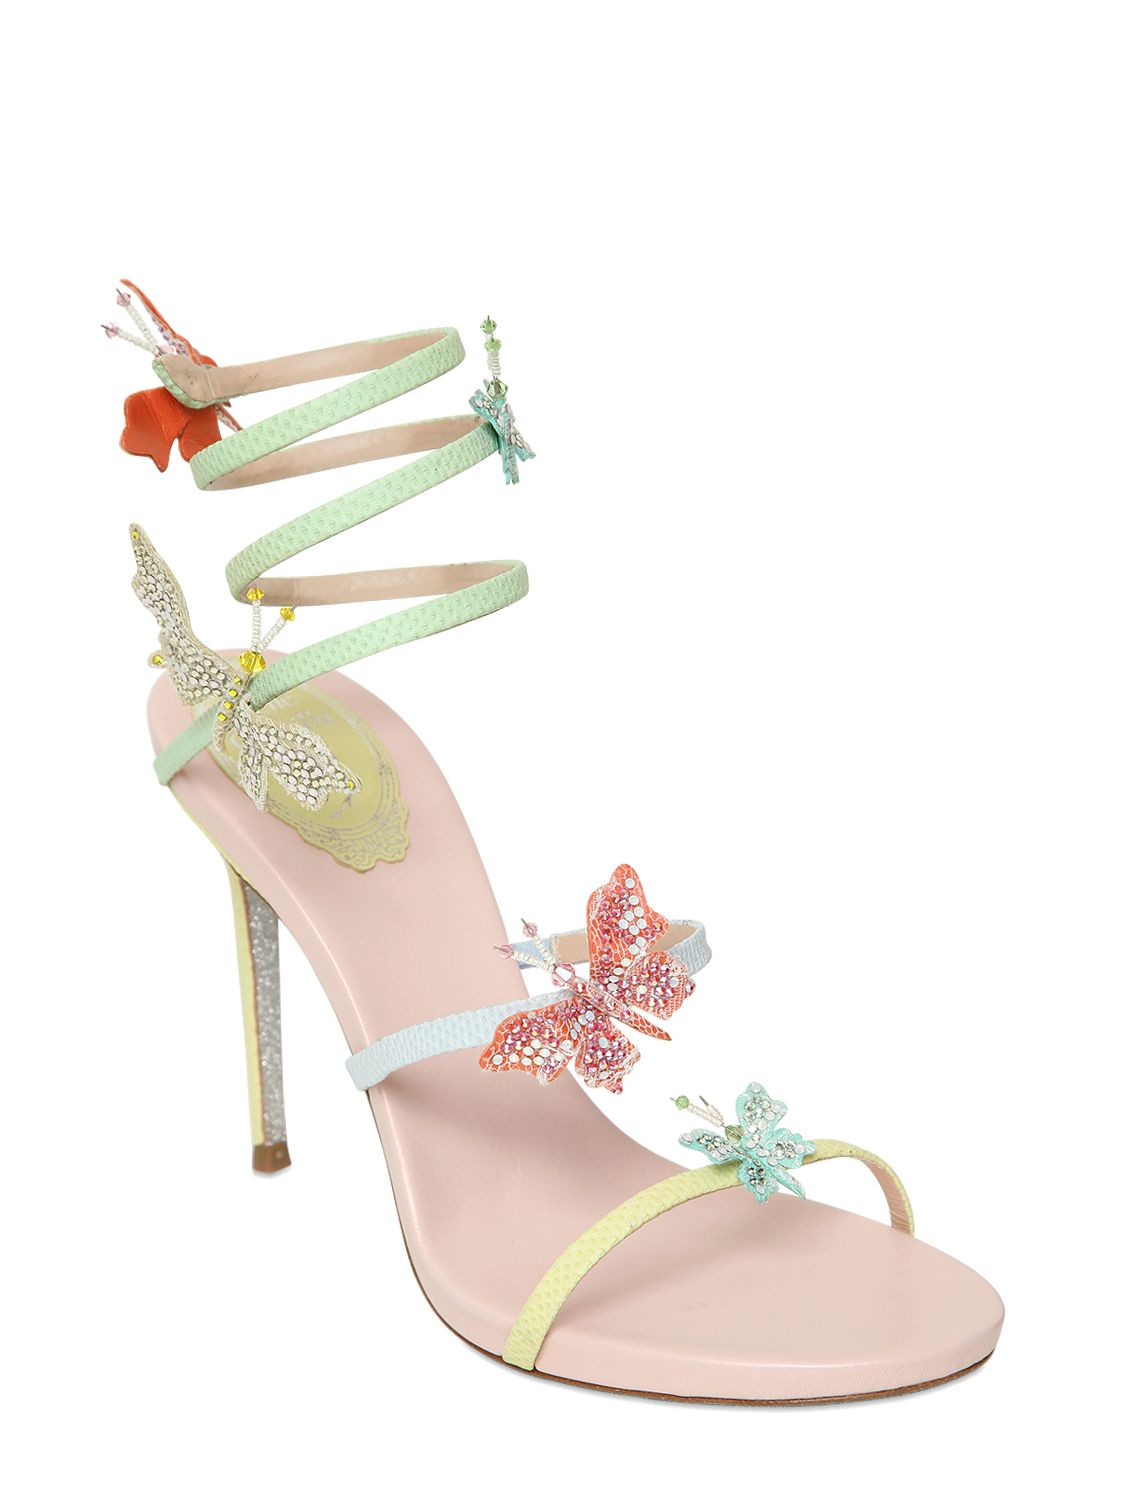 Lyst - Rene Caovilla 105mm Butterfly Karung & Leather Sandals